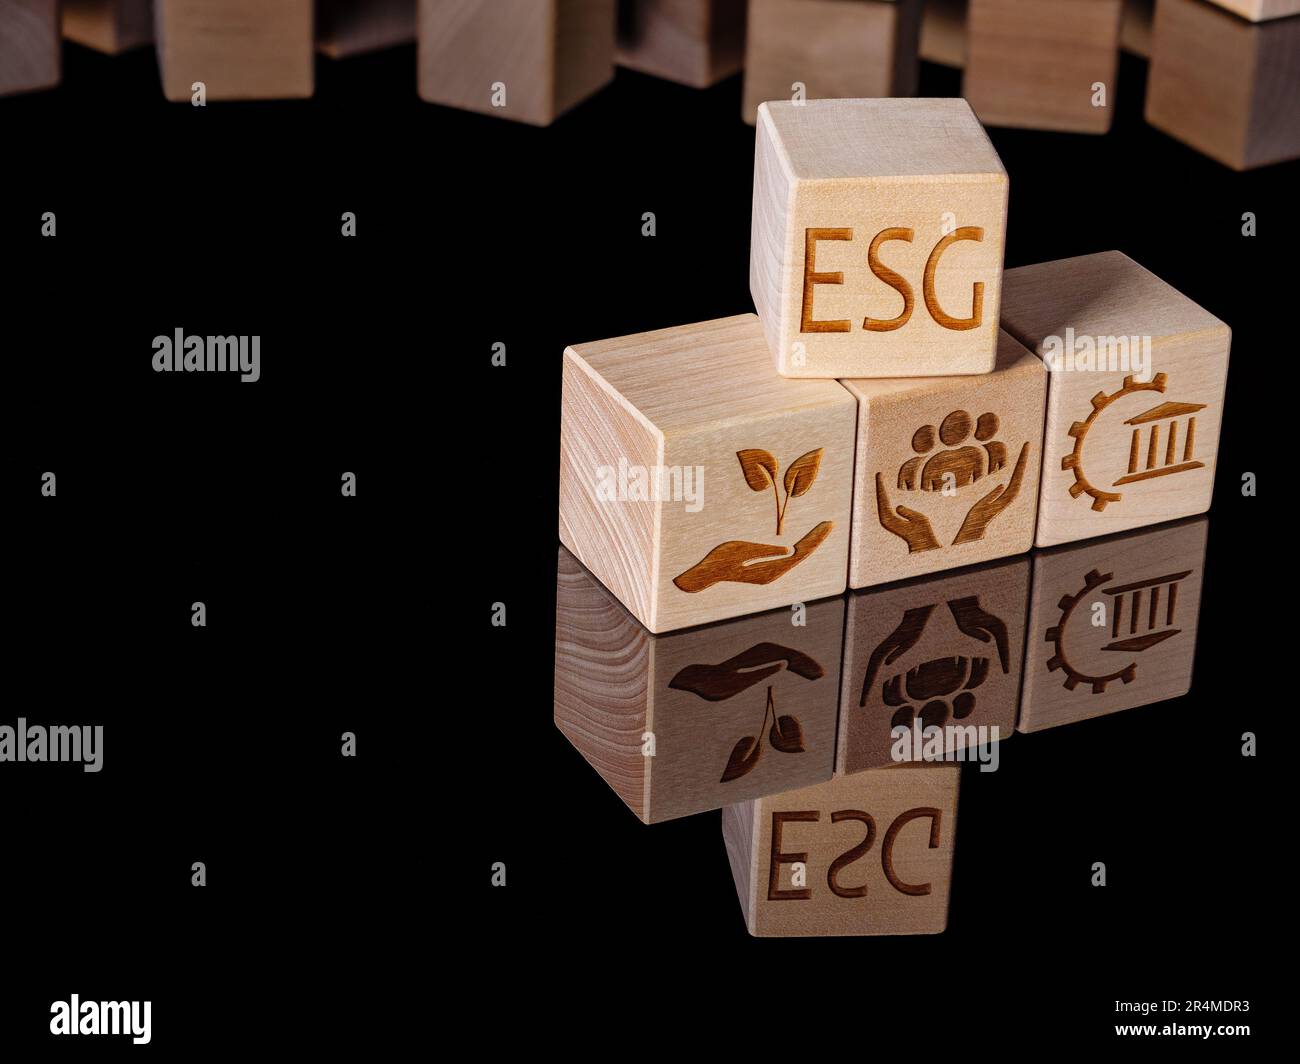 ESG symbols as a concept of environmental, social development and corporate governance issues Stock Photo